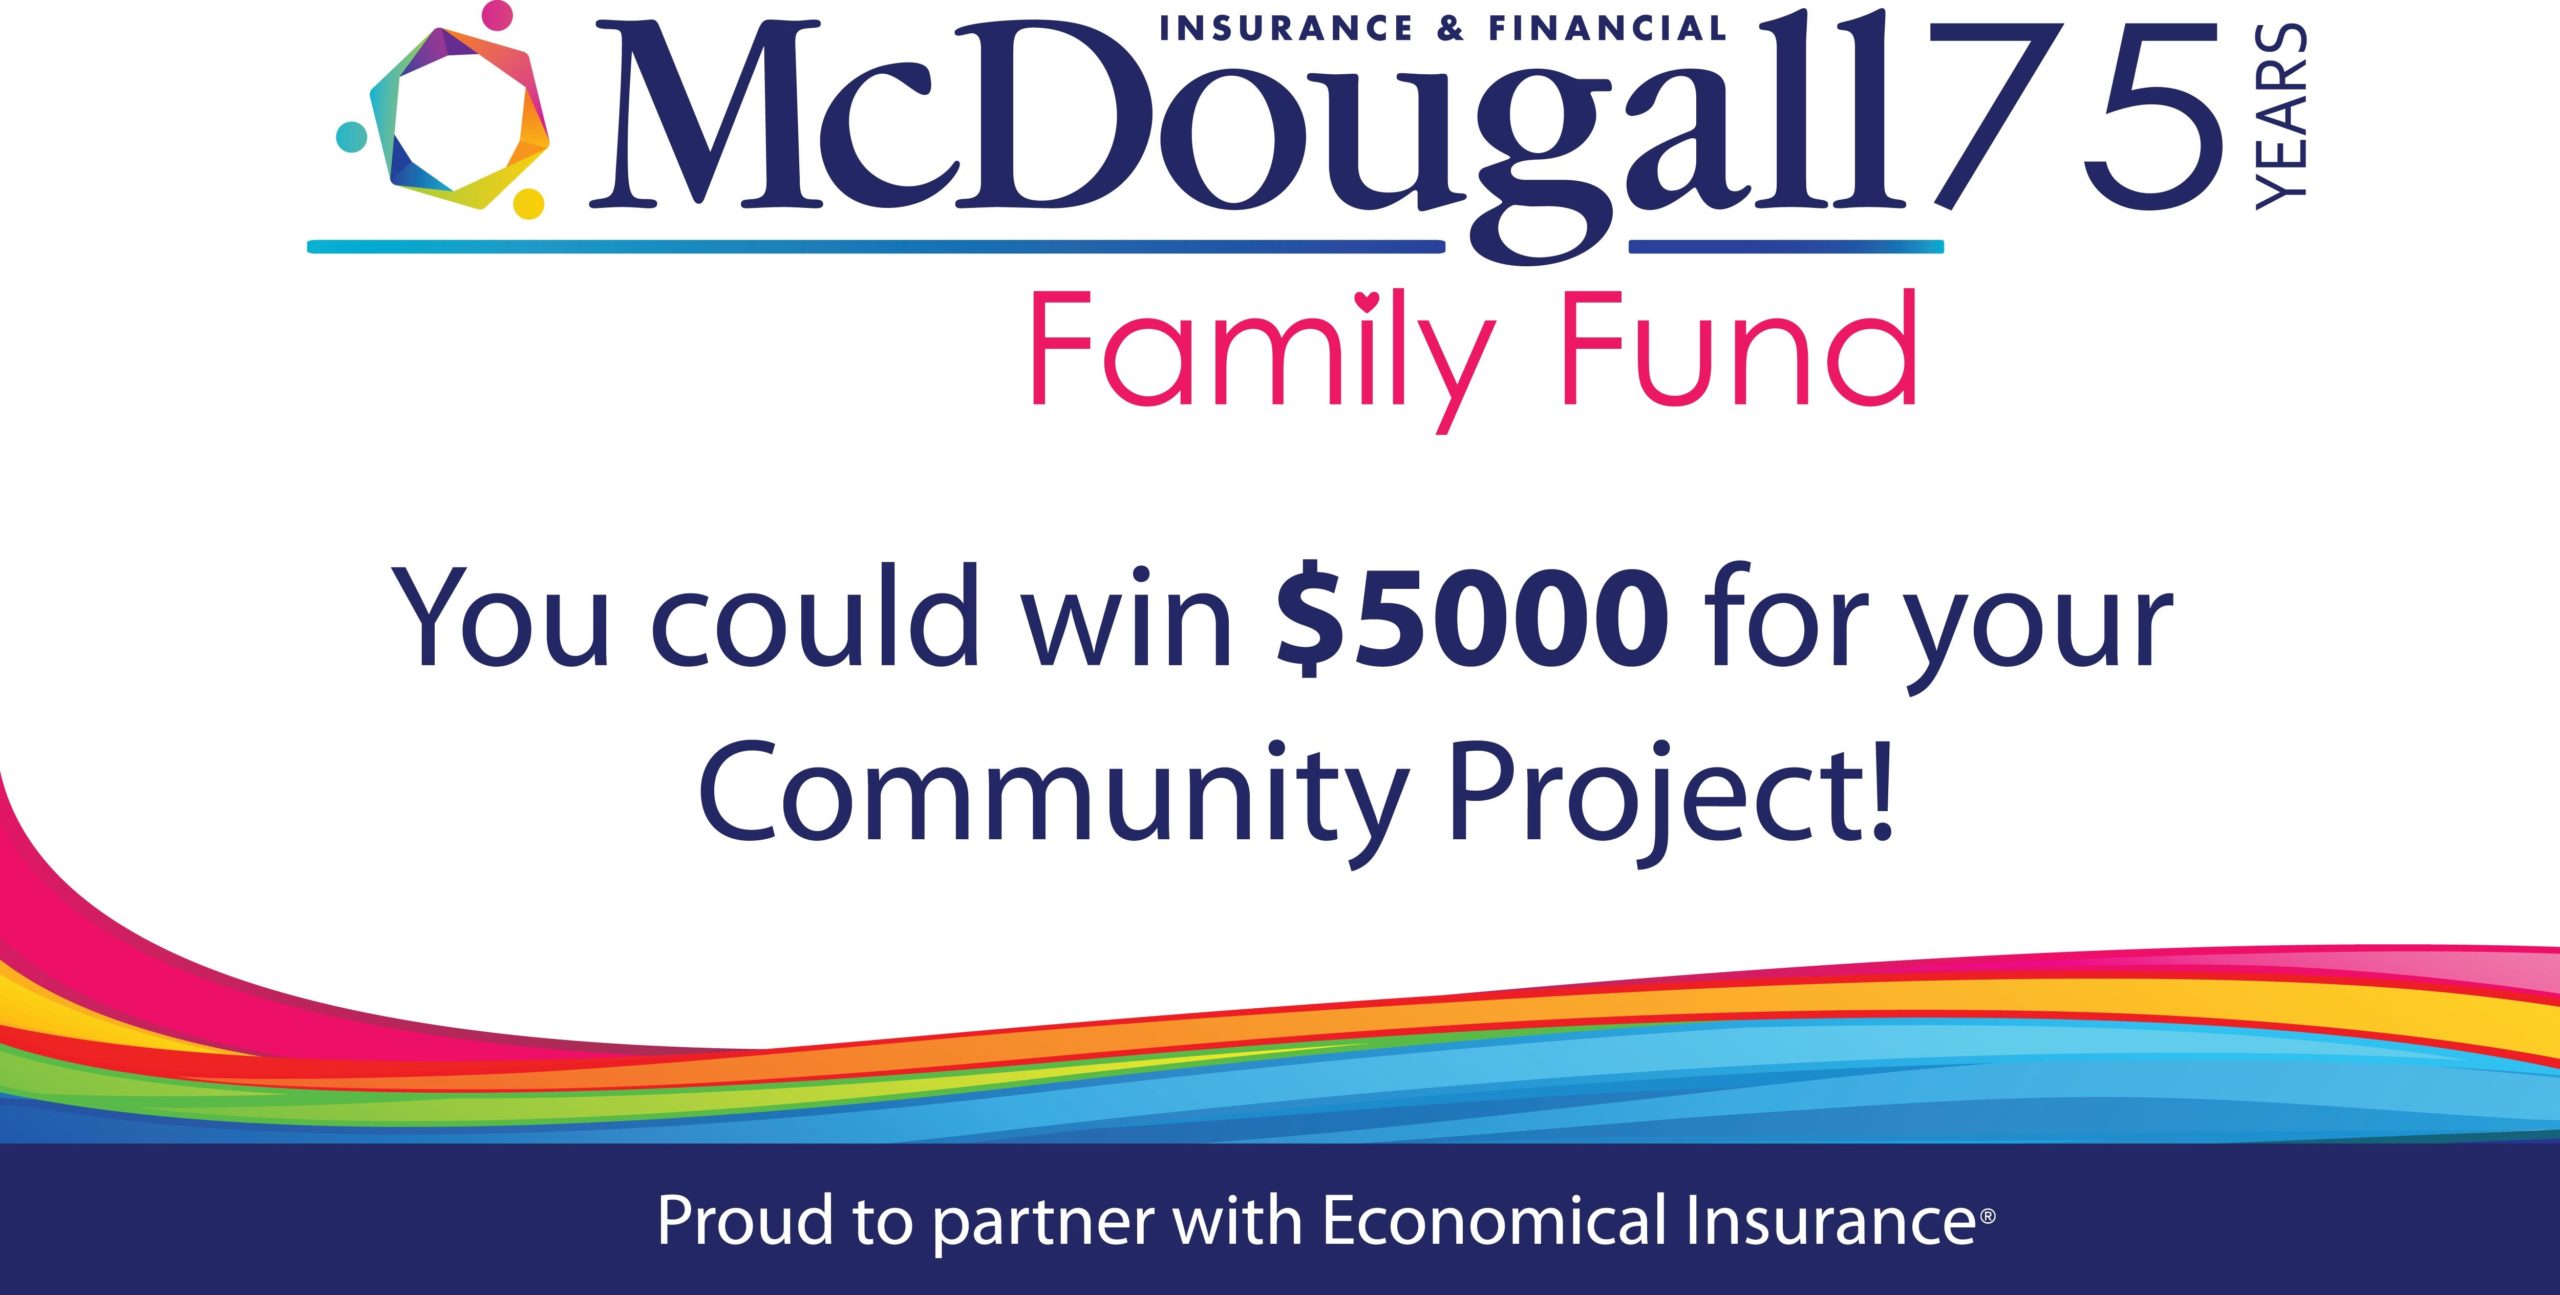 McDougall Family Fund 2021 FB ad showing a $5000 prize for your community project